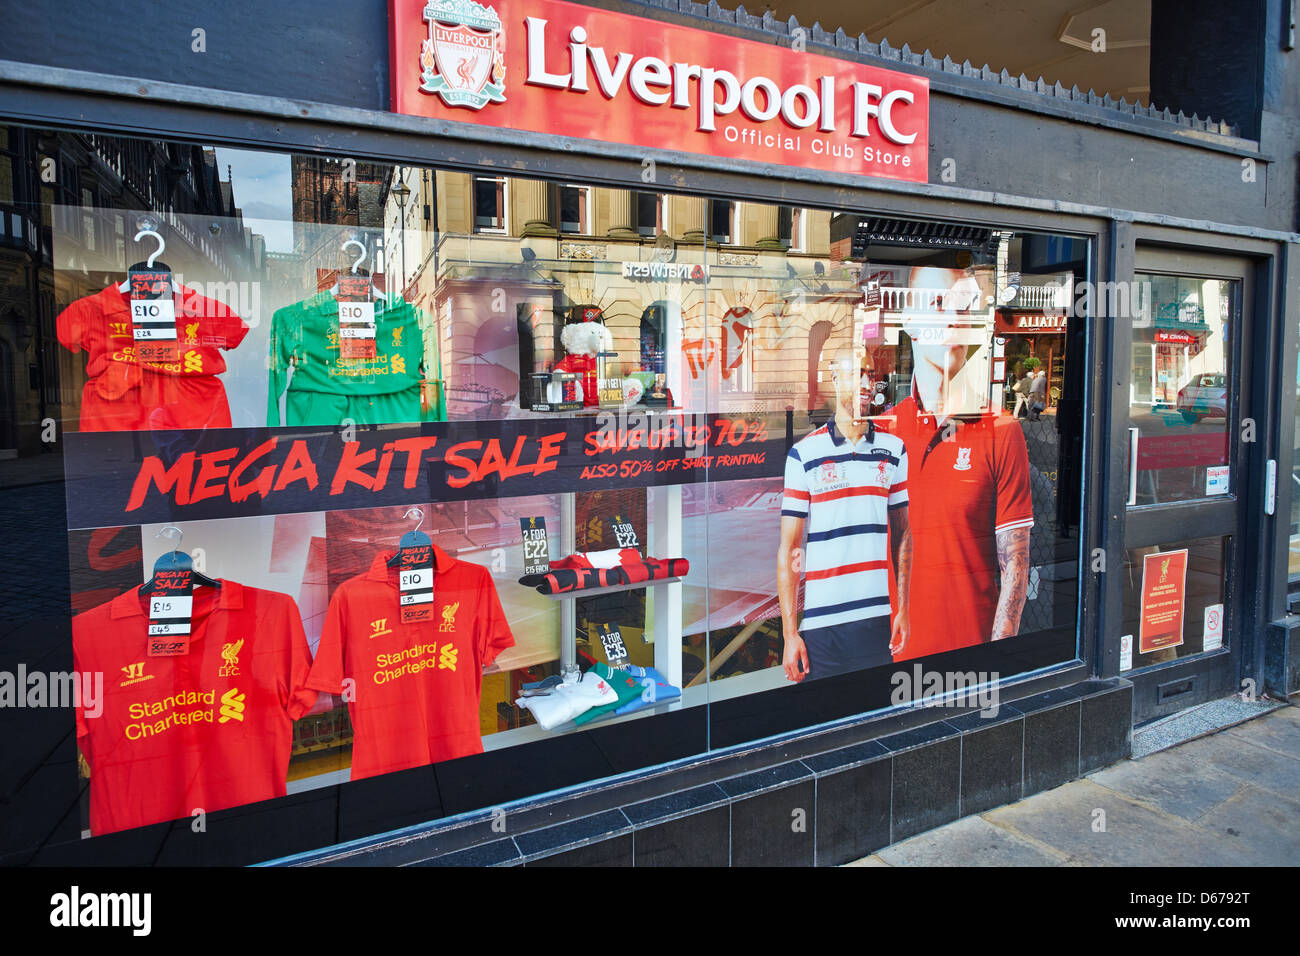 Liverpool Football Club Official Shop Eastgate Street Chester UK Stock Photo